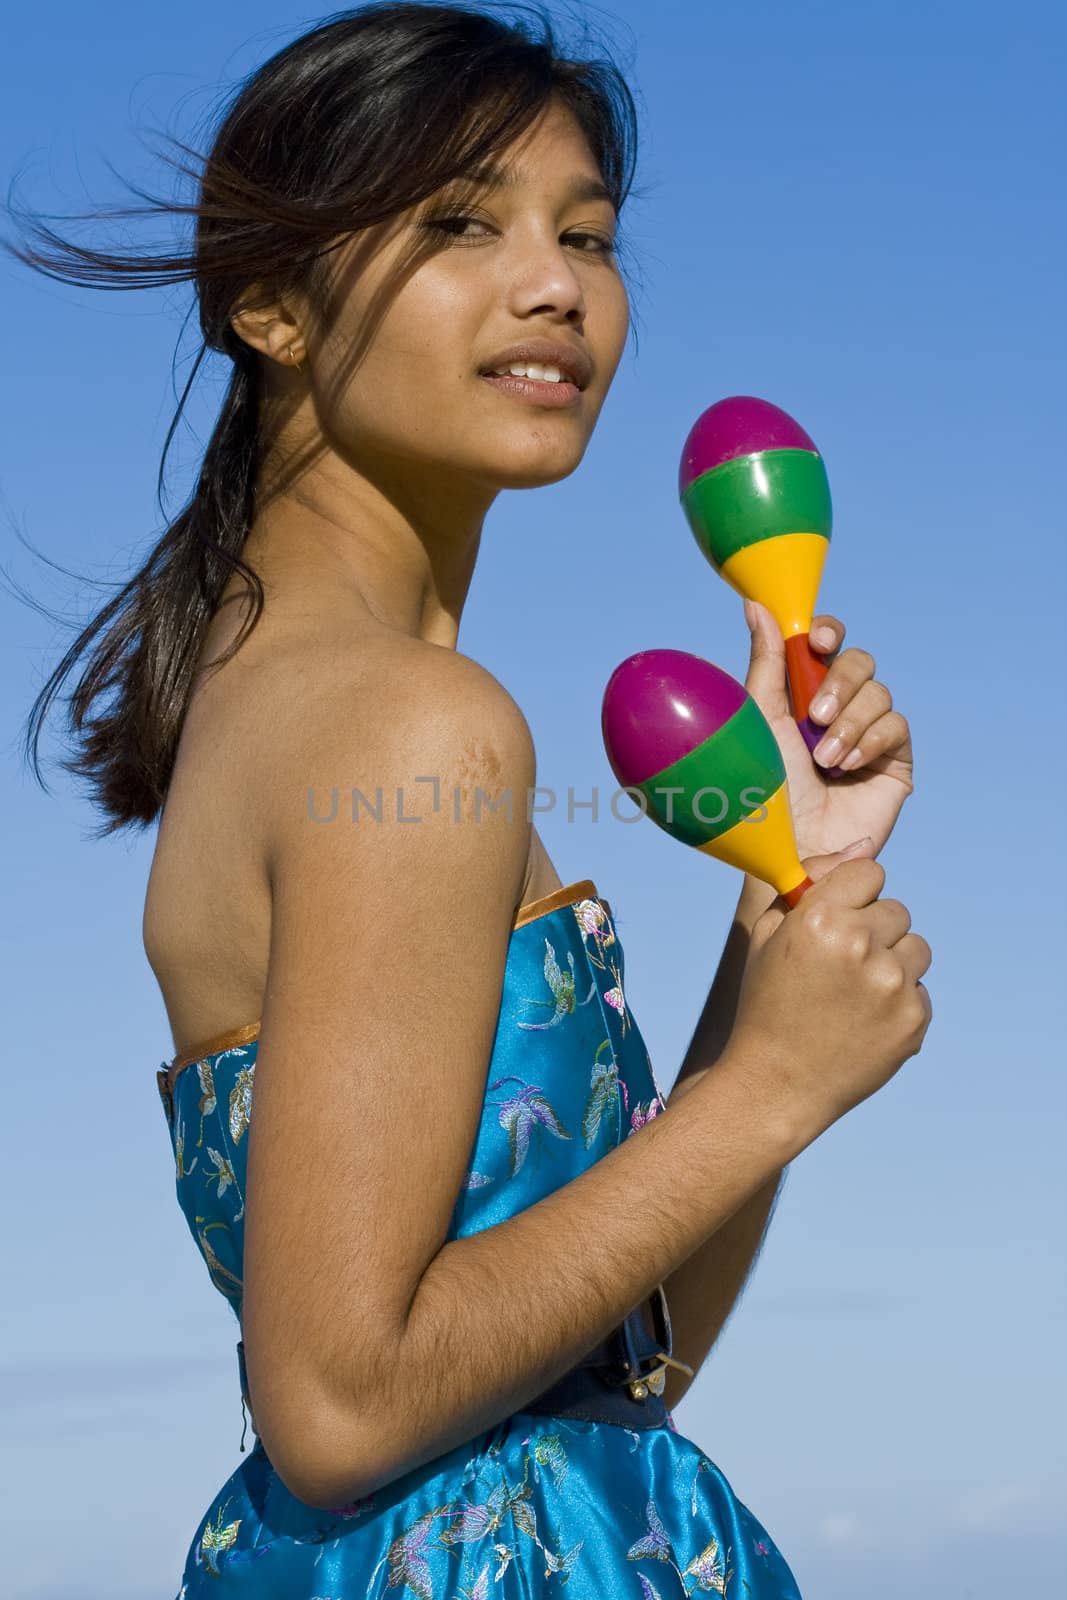 Girl in asian inspired dress with two colourful shakers